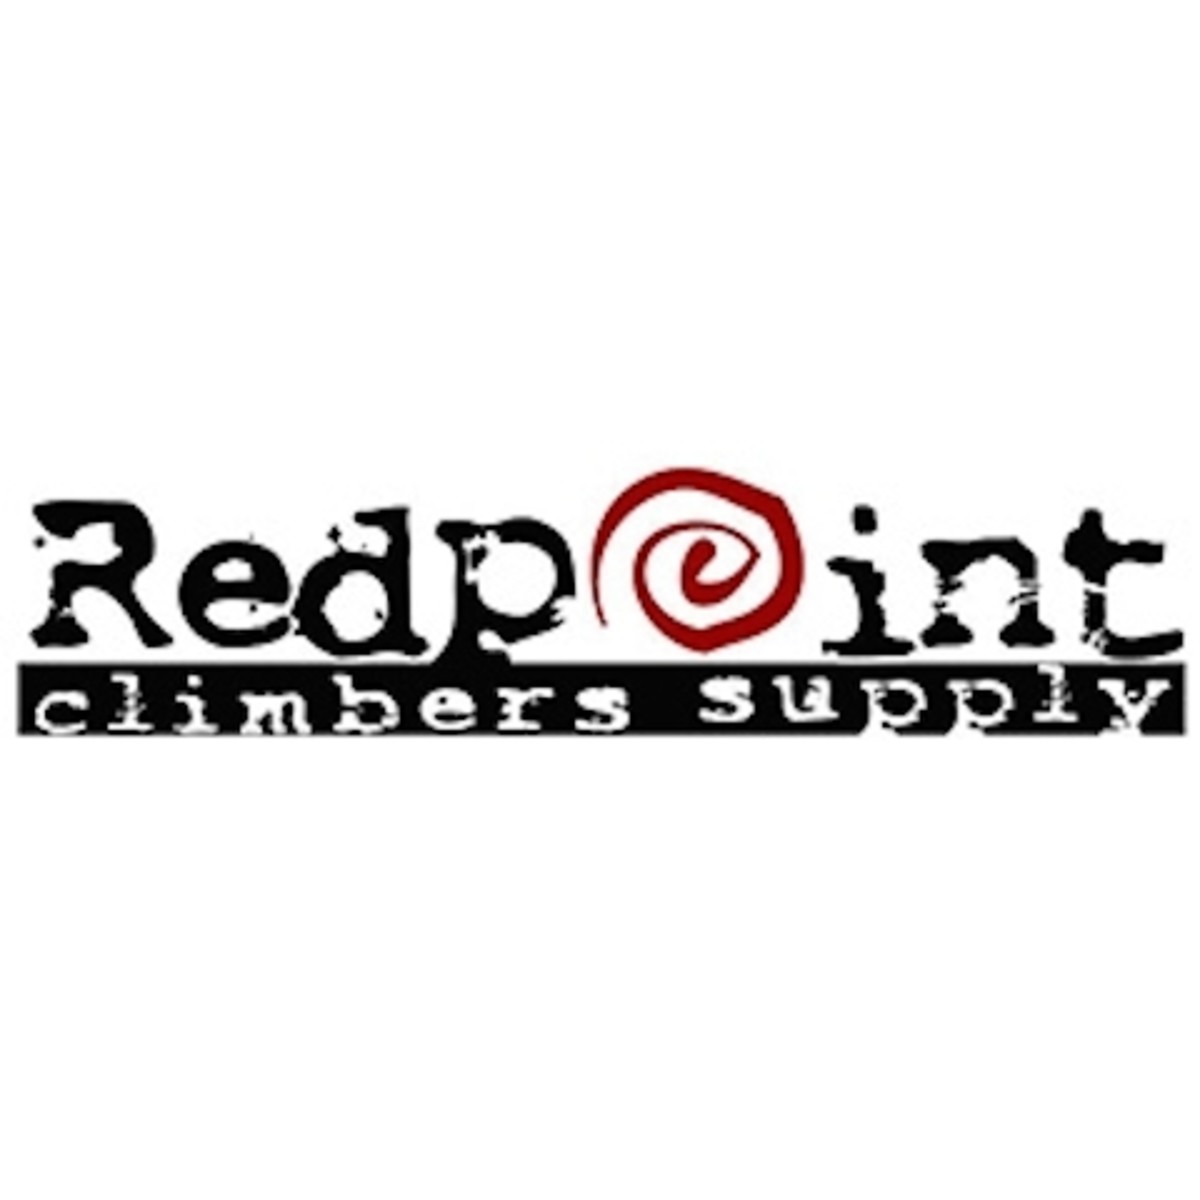 7redpoint-climbers-supply-terrebonne-or-best-gear-stores